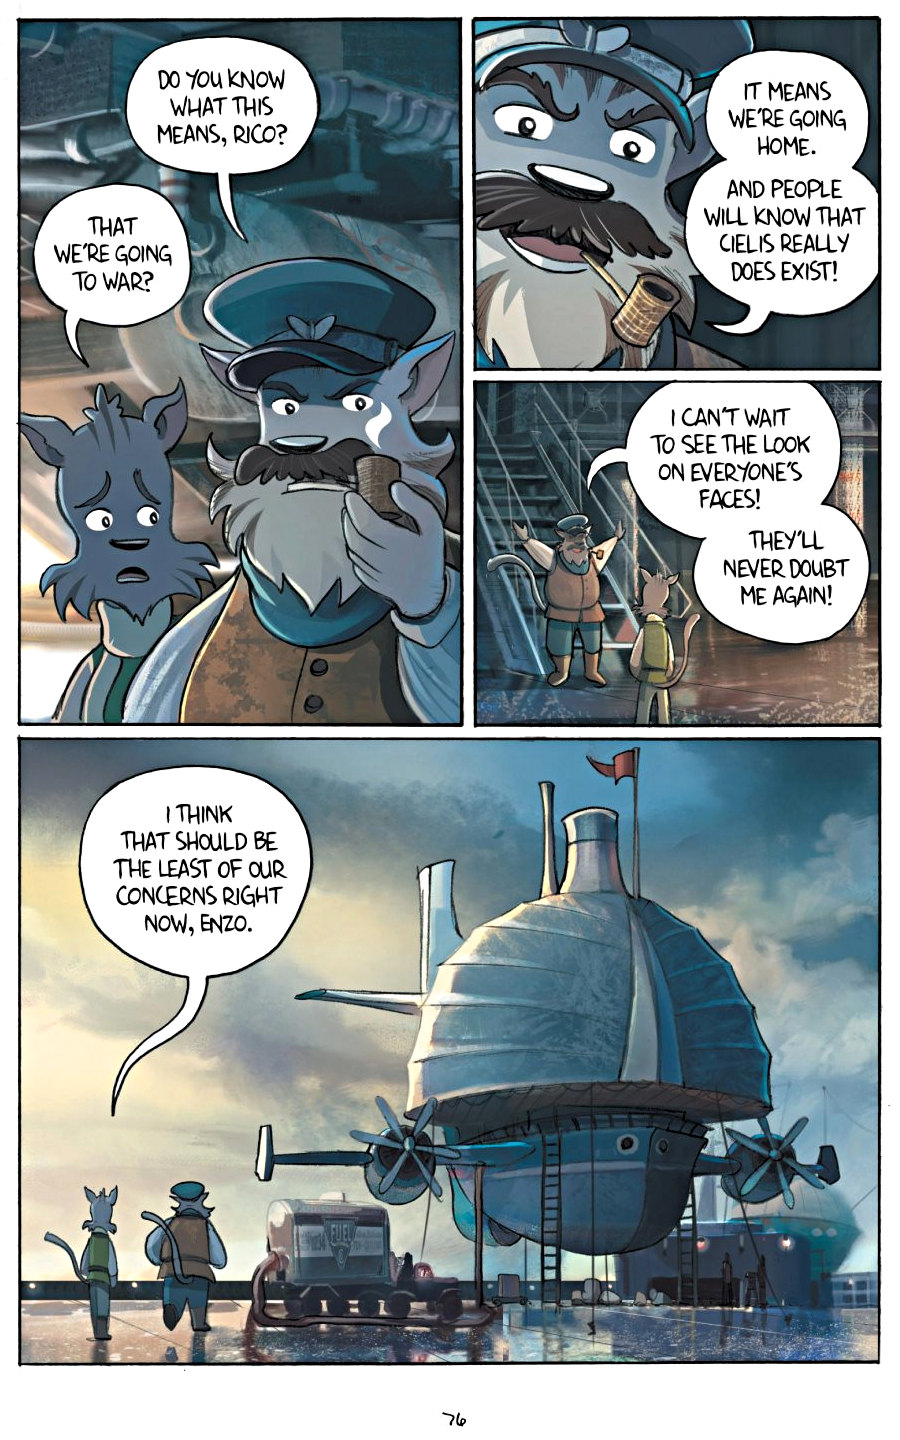 page 76 of amulet 5 prince of the elves graphic novel